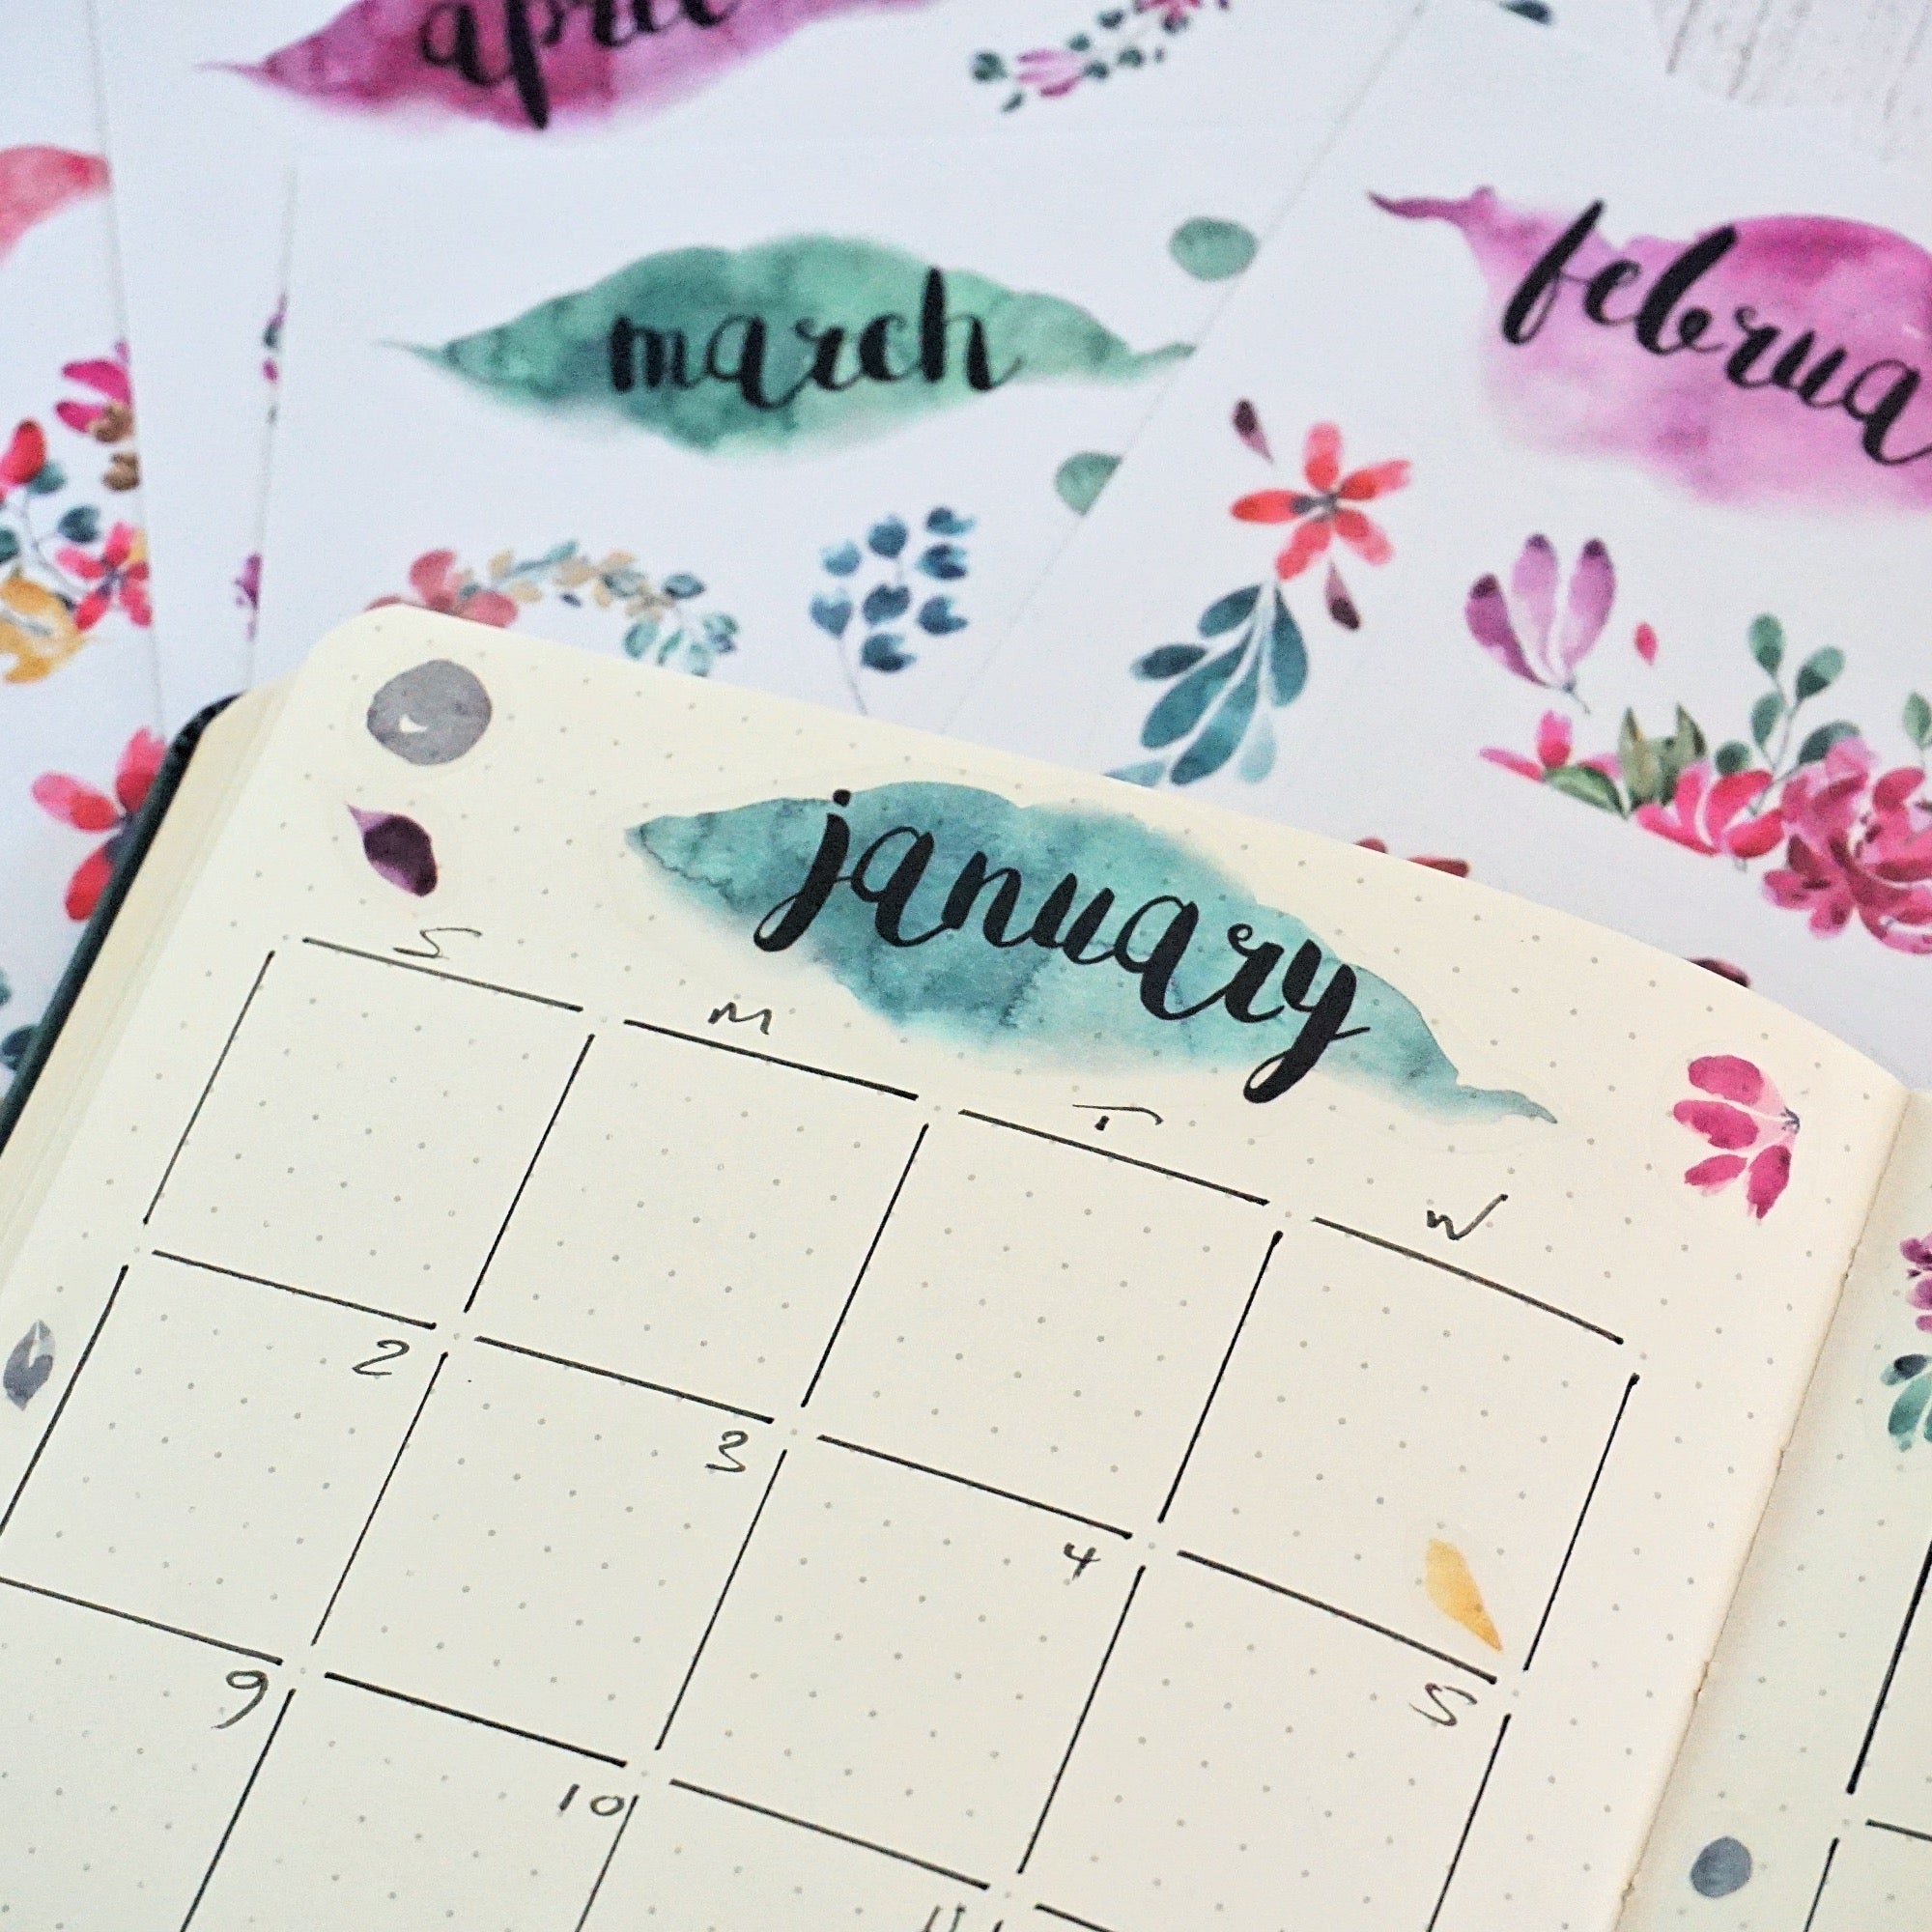  Transparent Monthly Planner Stickers - 12 Clear Sticker Sheets  with Beautiful Watercolor Stickers & Undated Calendar Sticker Months -  Planner, Scrapbooking and Journaling Supplies (Floral) : Office Products